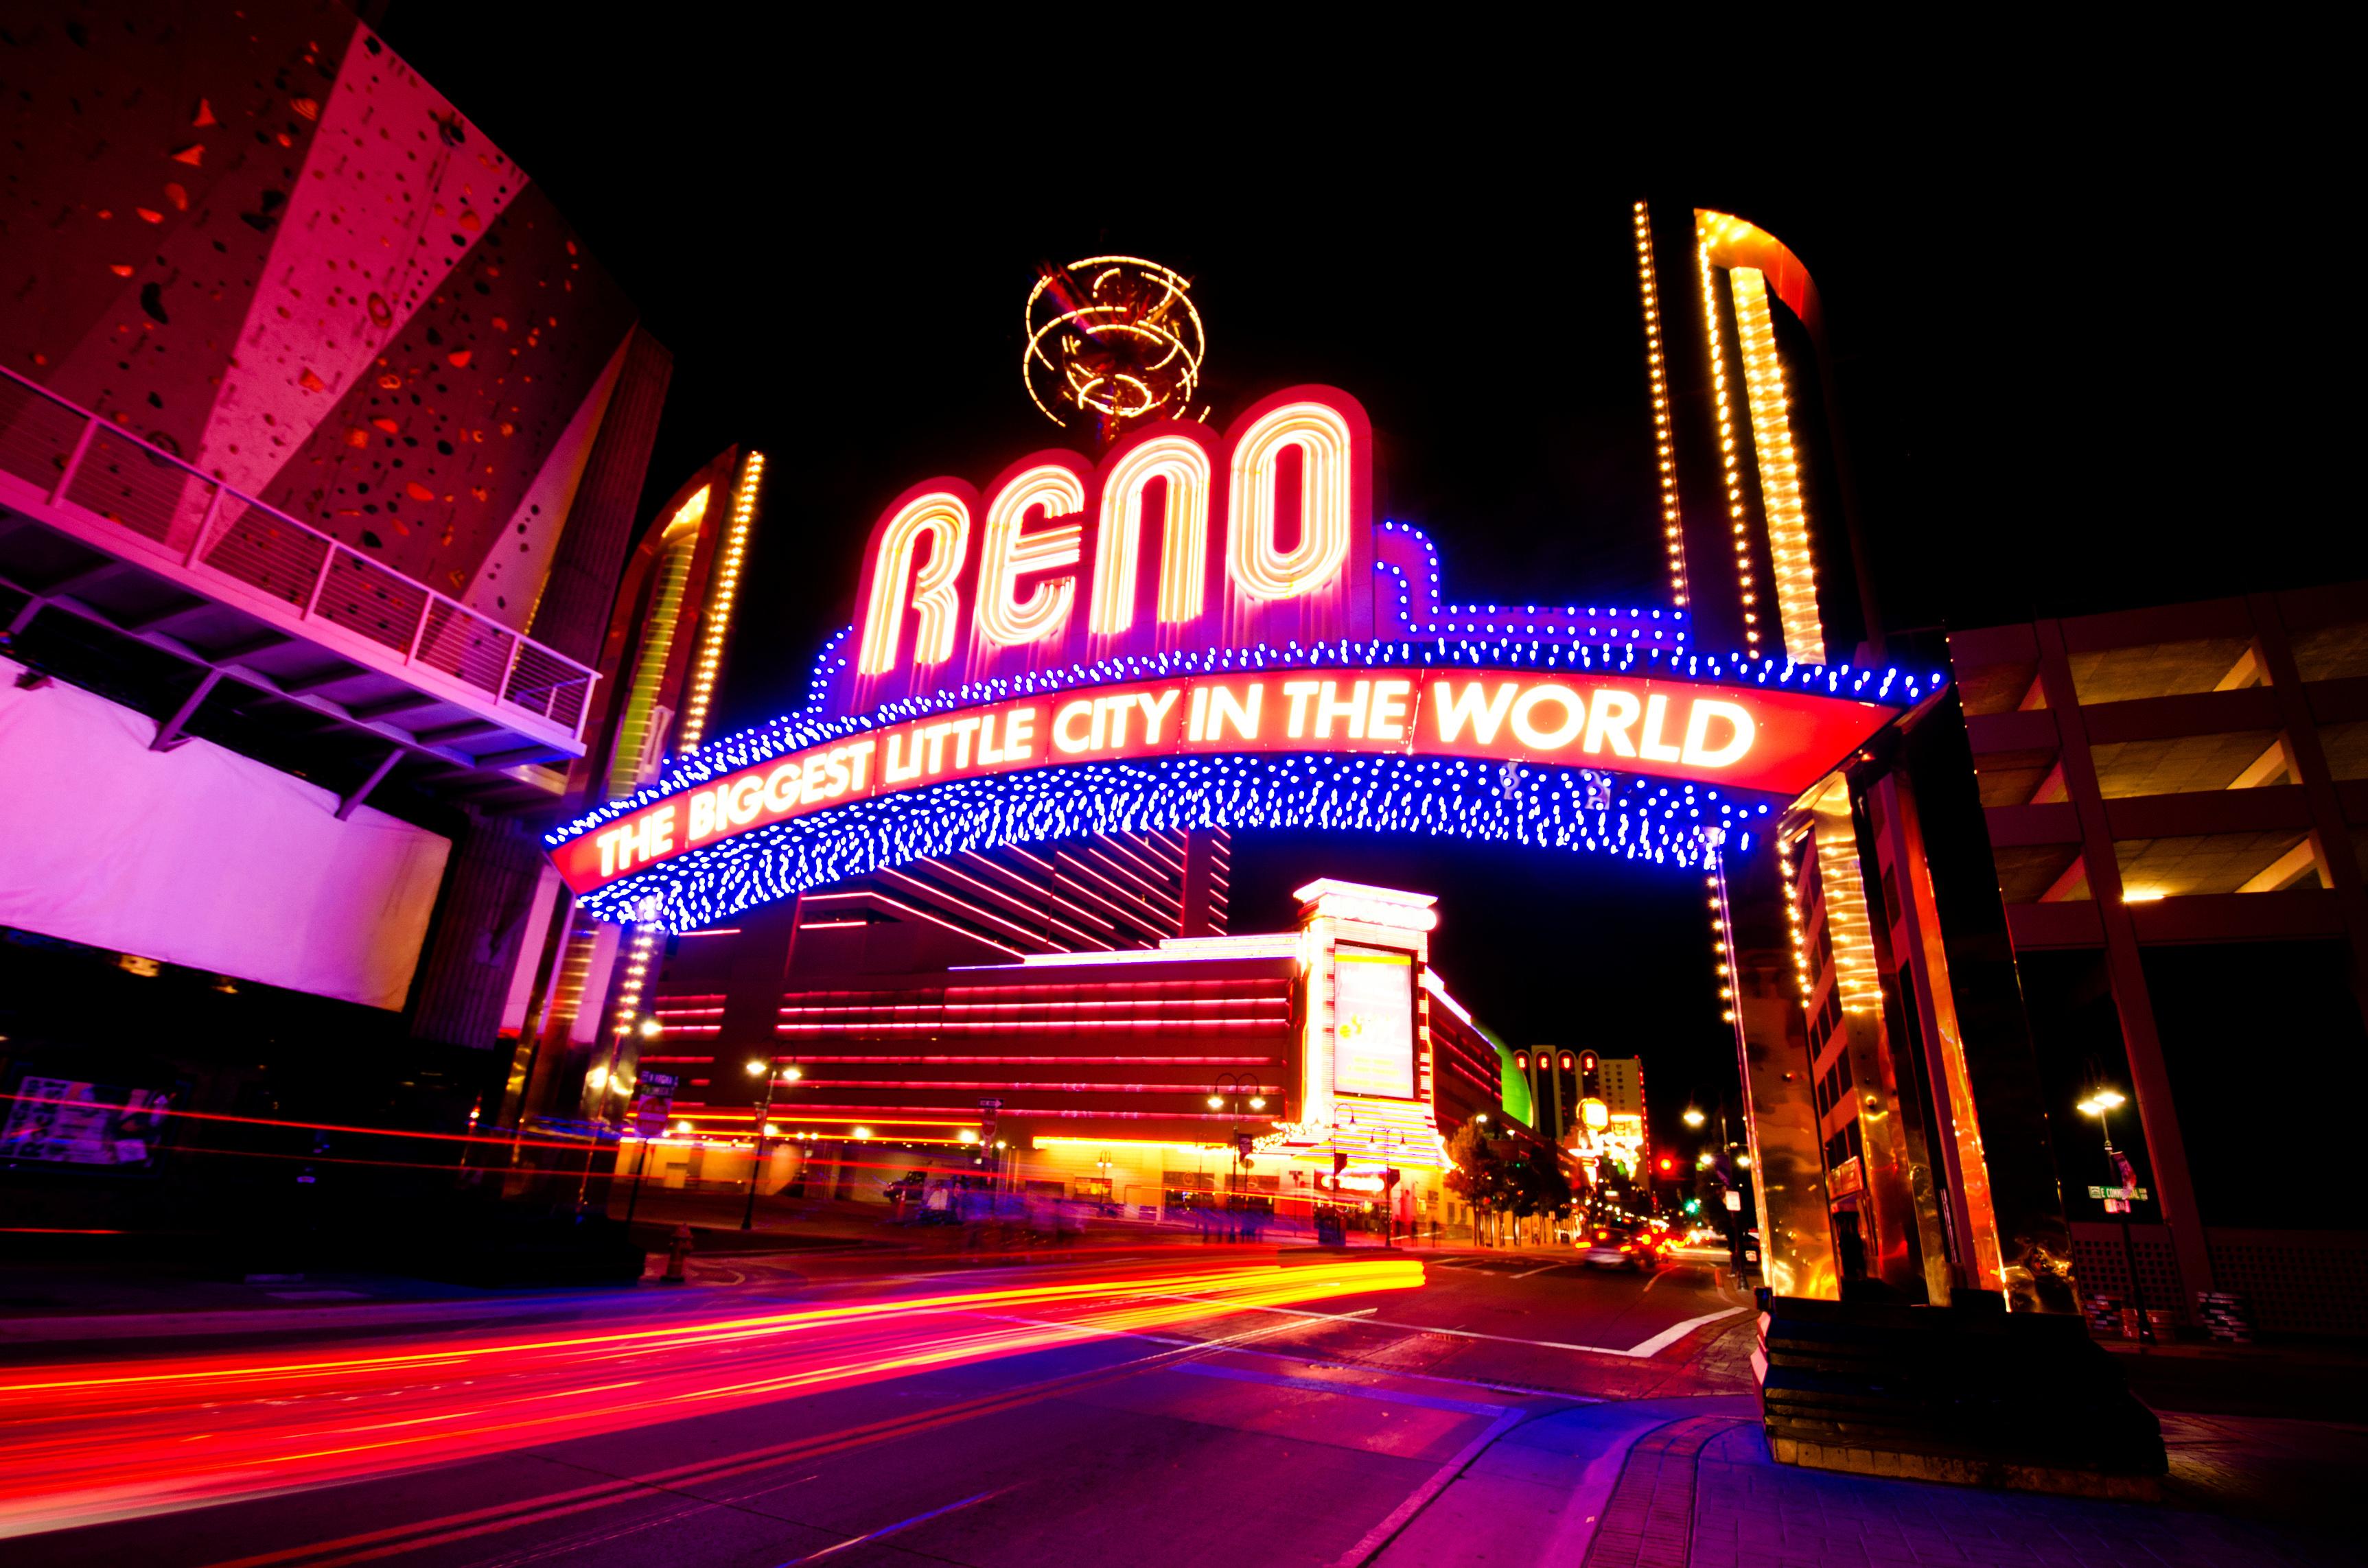 Neon Biggest Little City sign at night in Reno, Nevada